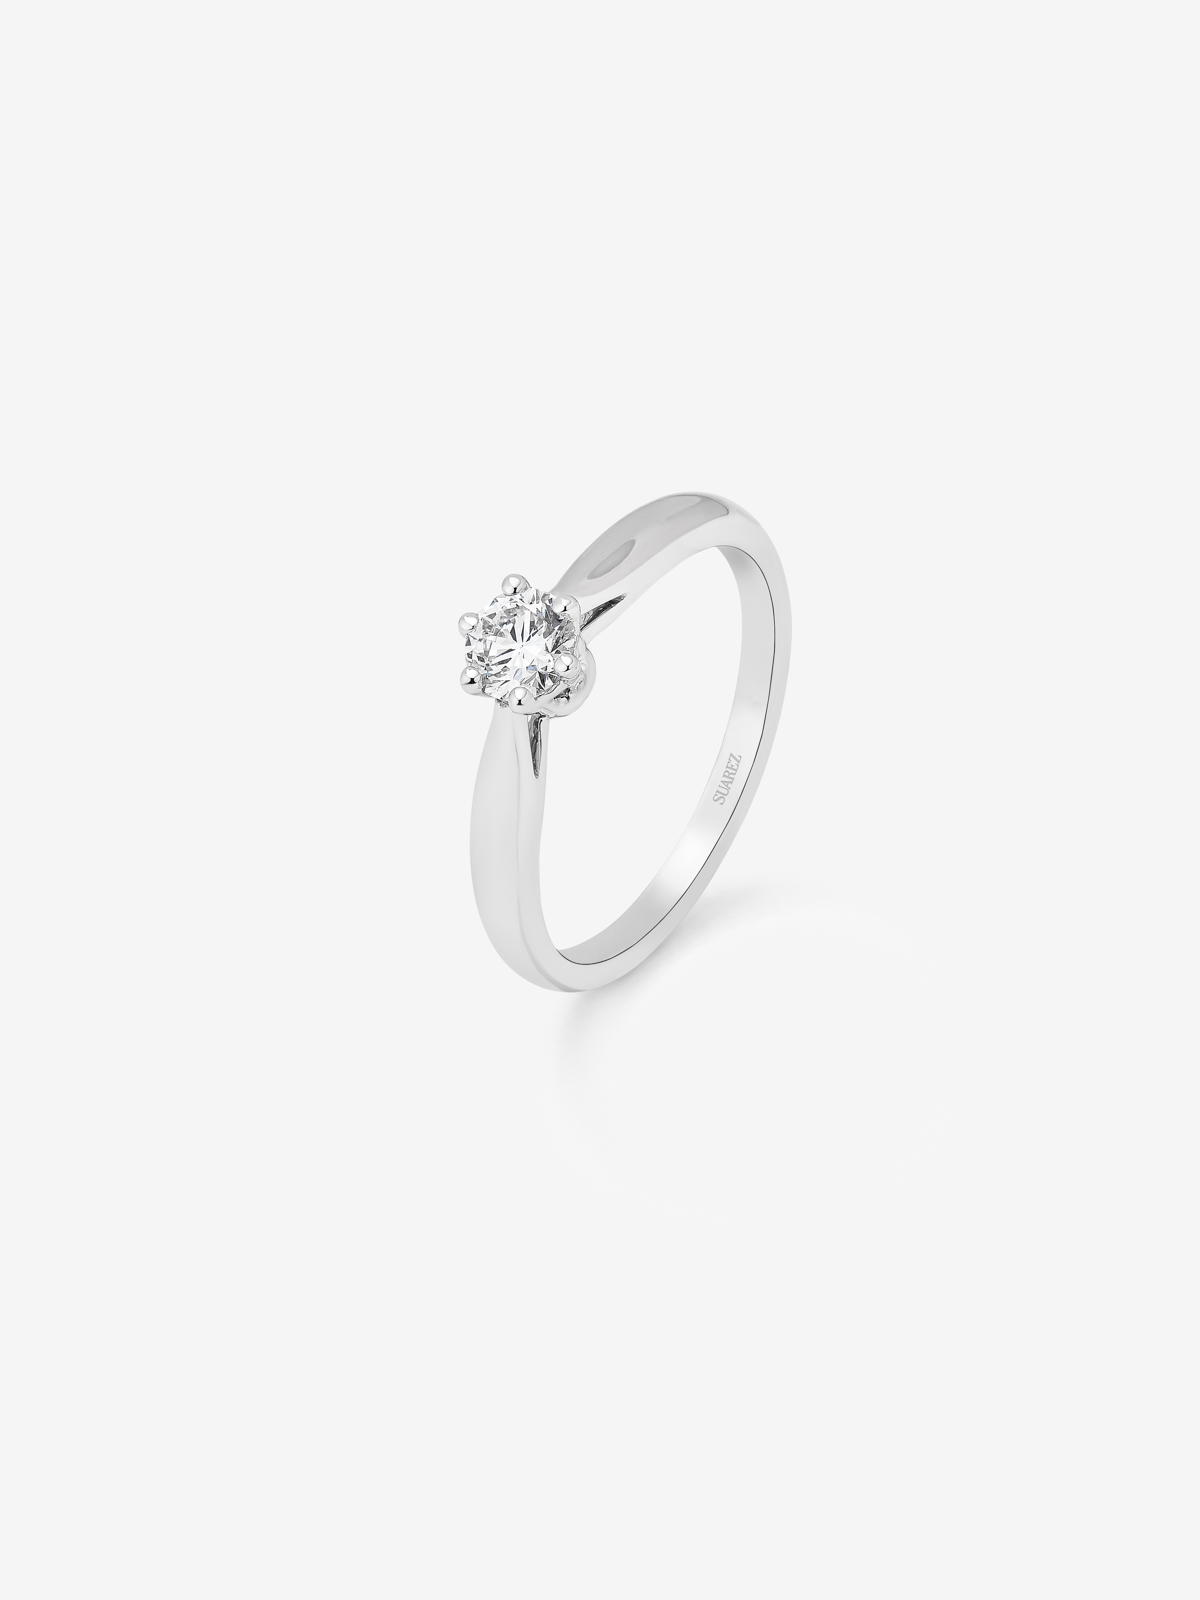 White gold engagement ring with diamond